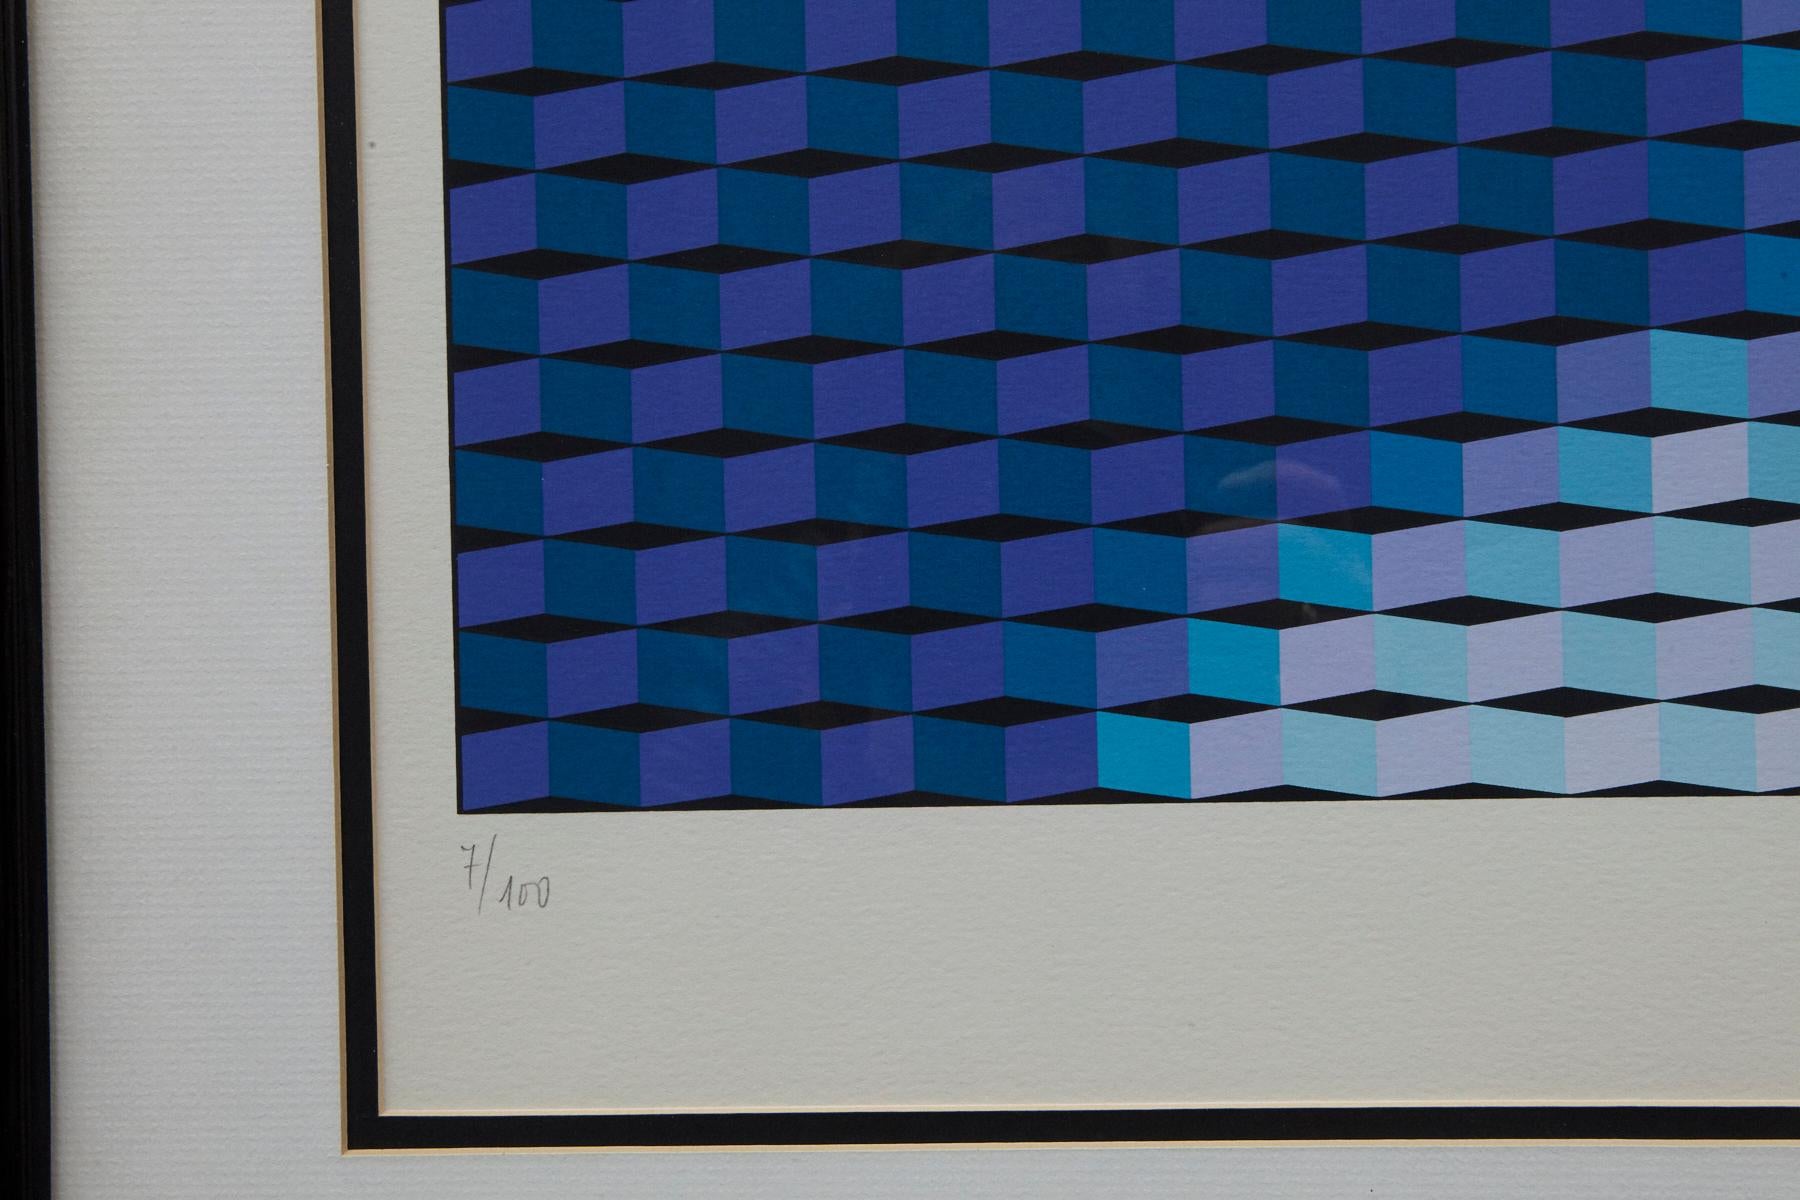 Mona Lisa - Blue Abstract Print by Yvaral (Jean-Pierre Vasarely)